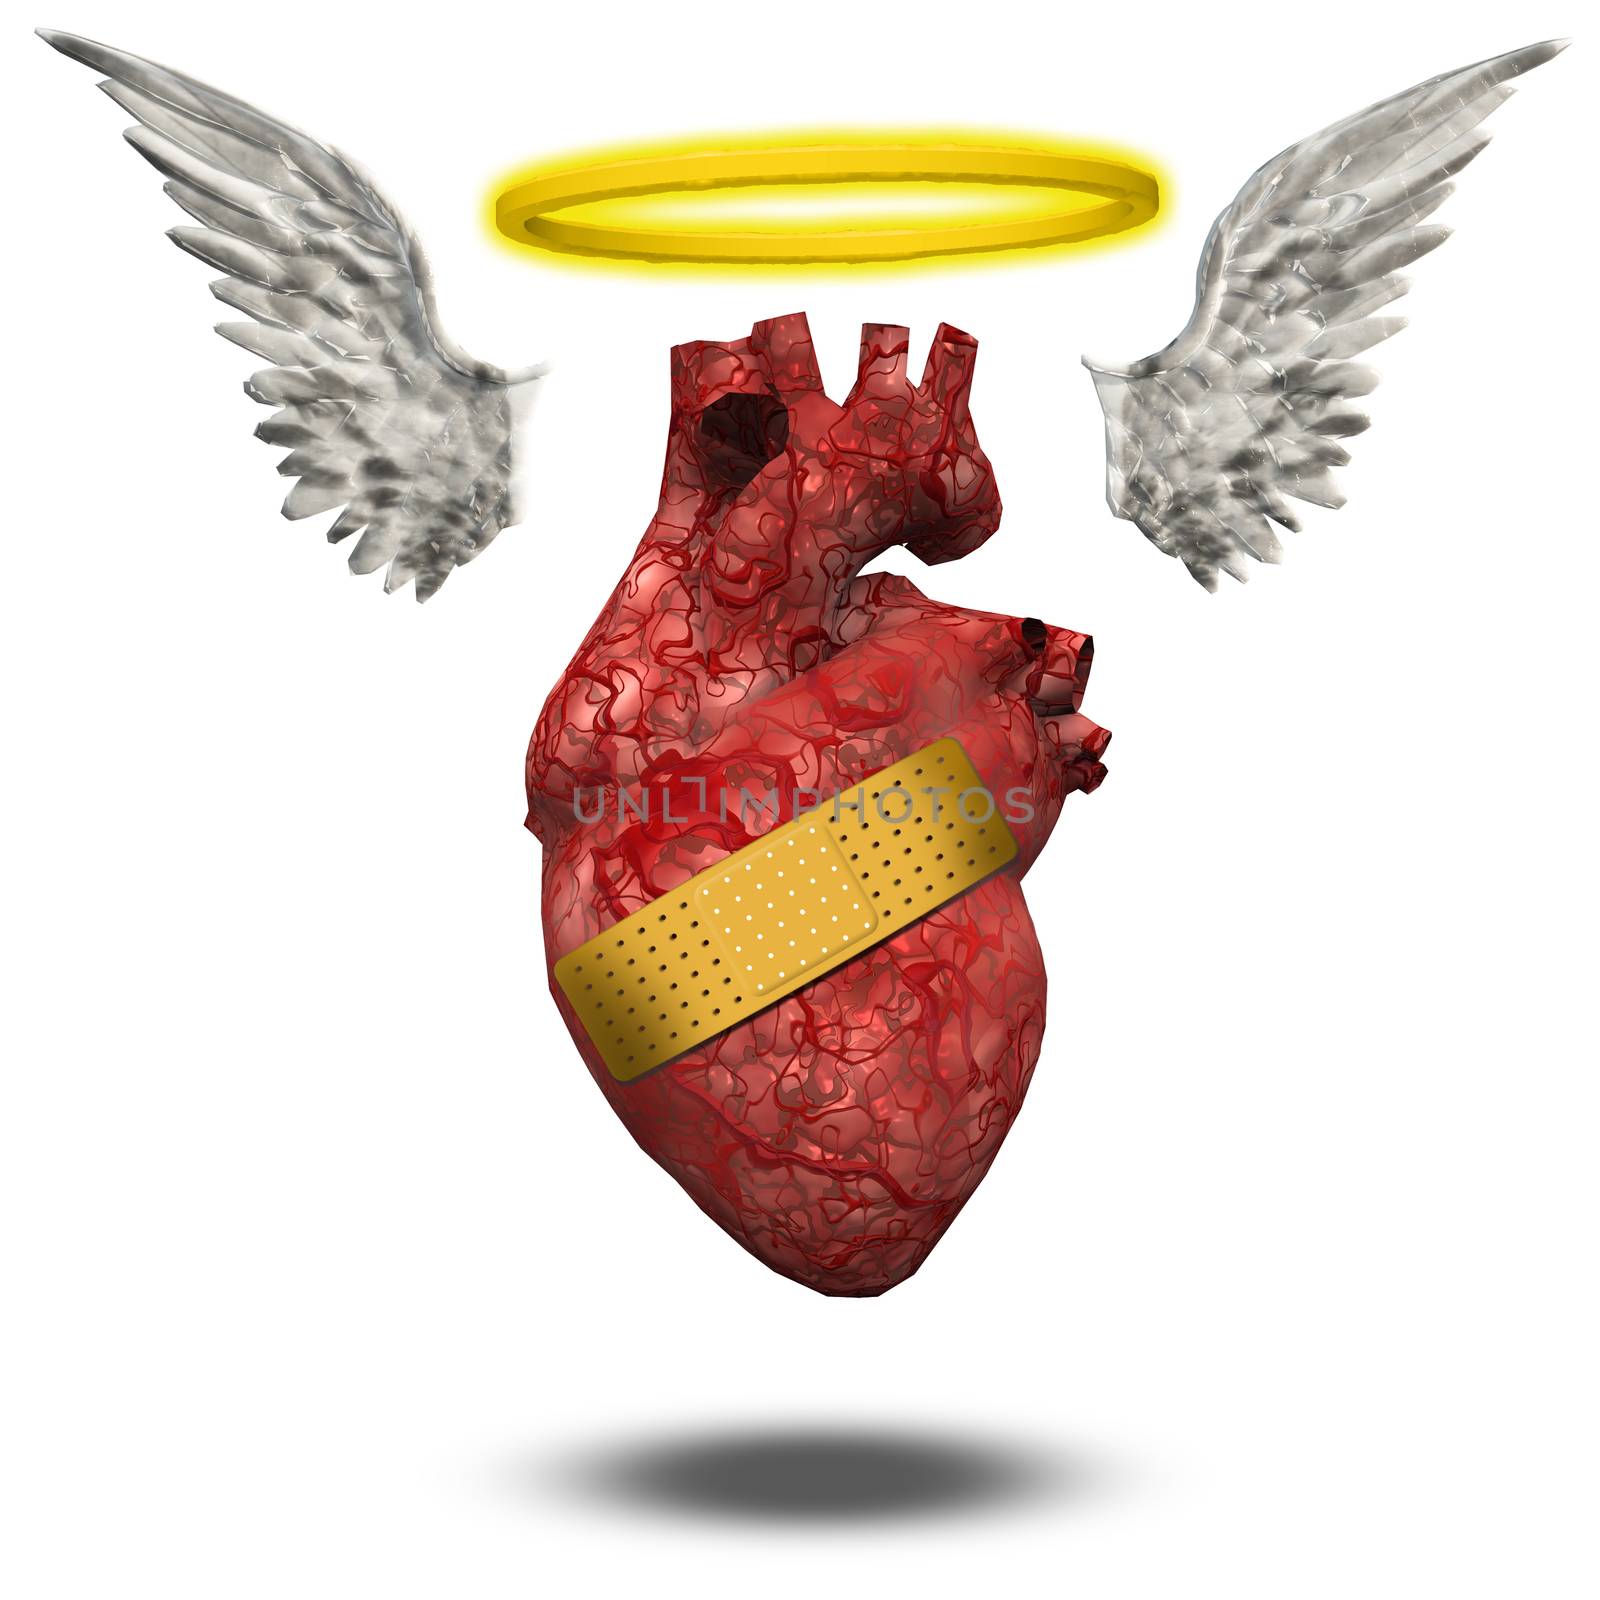 Wounded good heart by applesstock